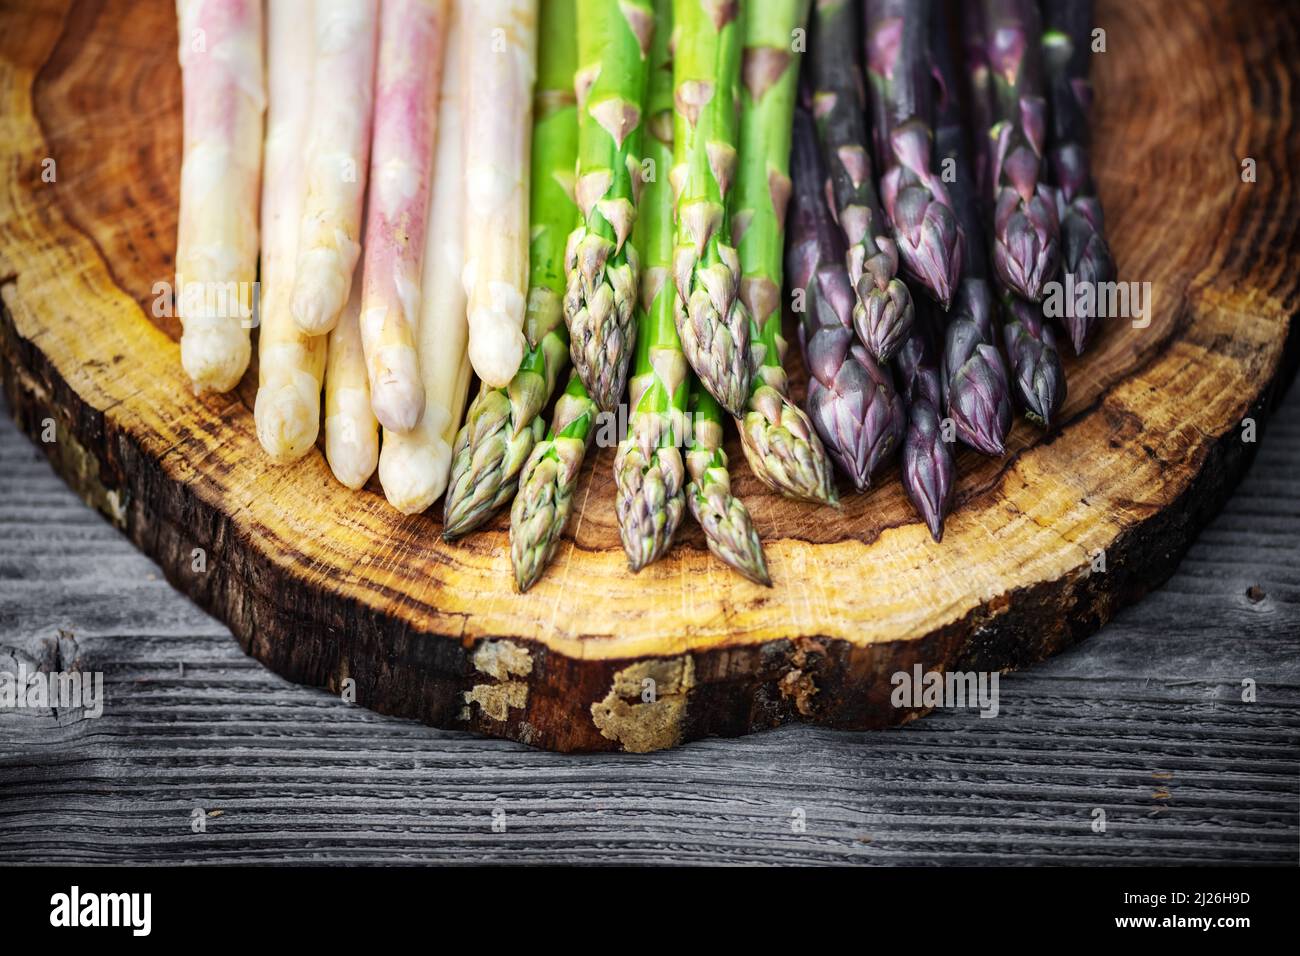 Green, purple and white asparagus sprouts on wooden board closeup. Top view flat lay. Food photography Stock Photo